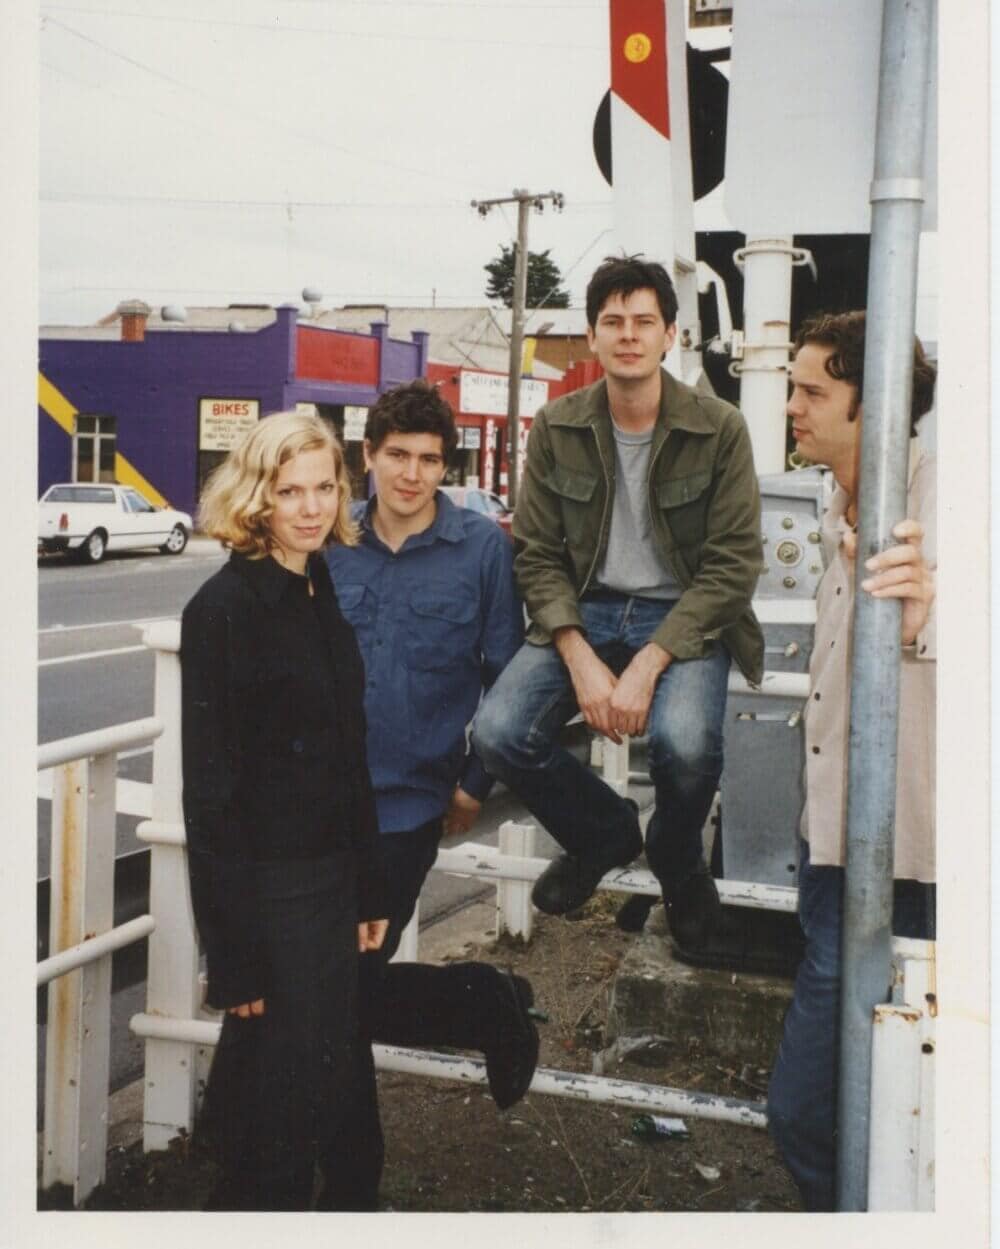 Press shot from 2001 for Wires album release